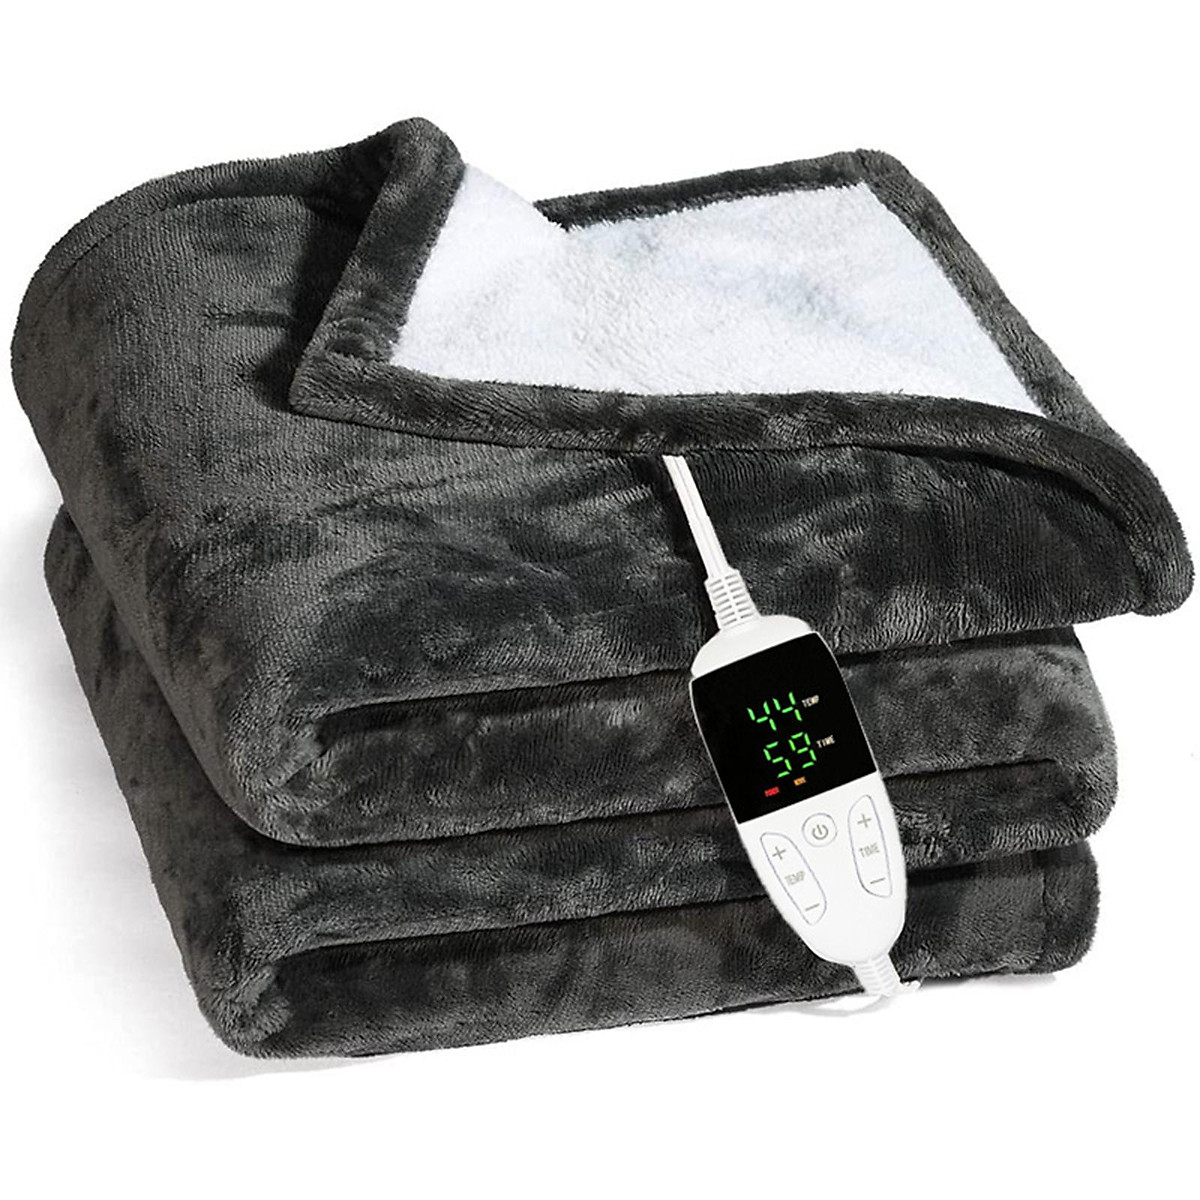 Nimeka Heating Pad Pack of 1: Buy Nimeka Heating Pad Pack of 1 at Best  Prices in India - Snapdeal